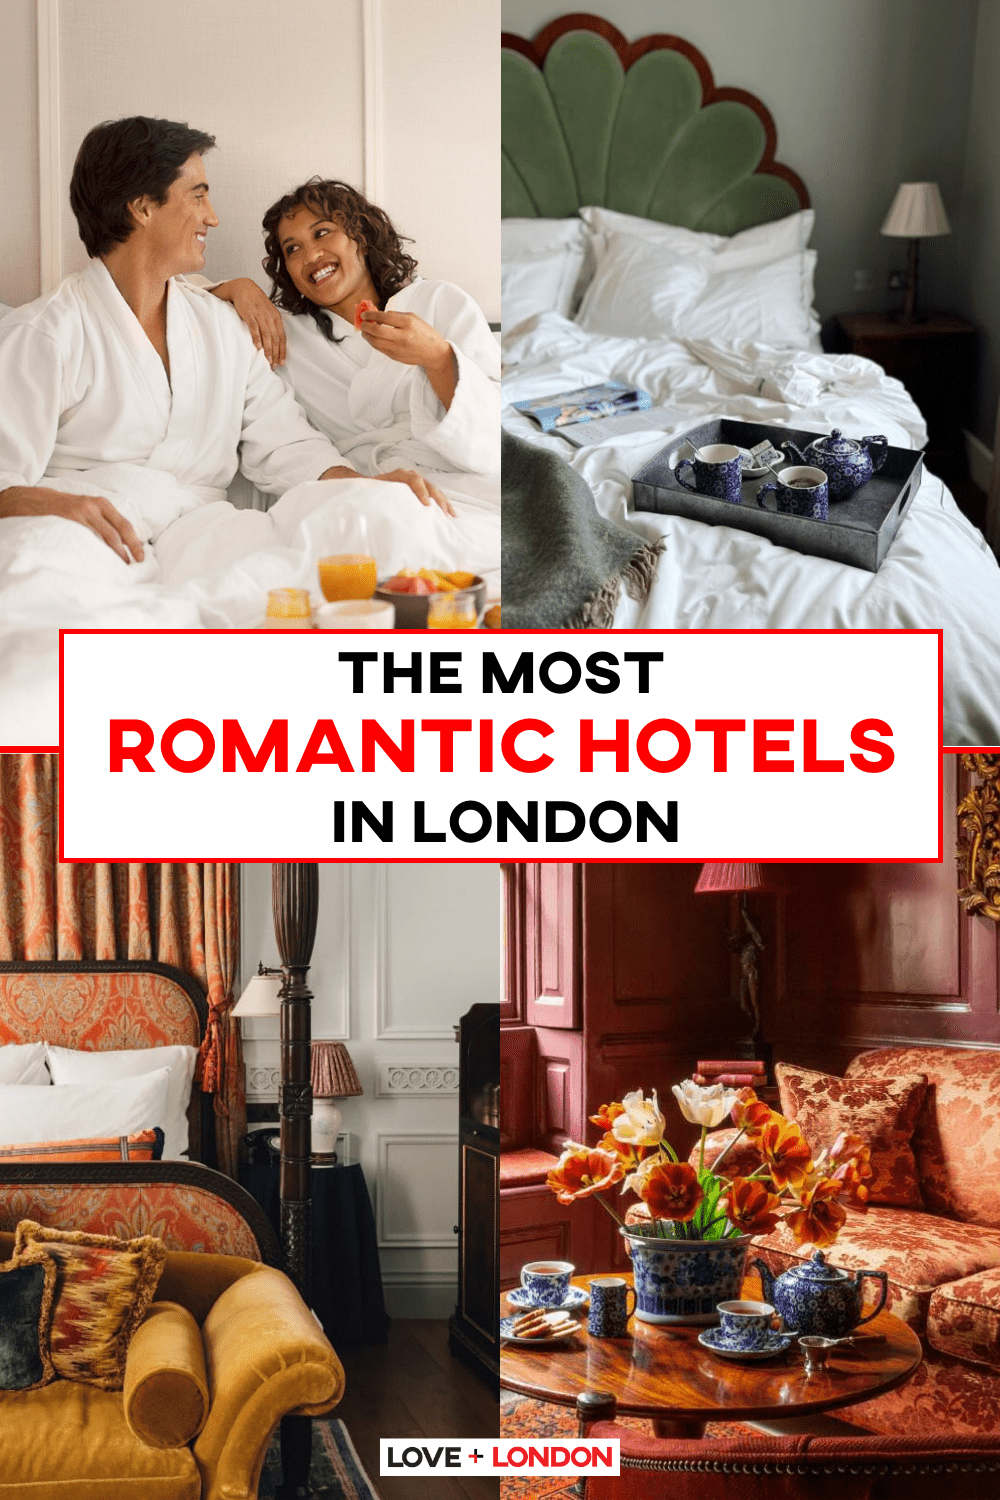 The most Romantic Hotels in London